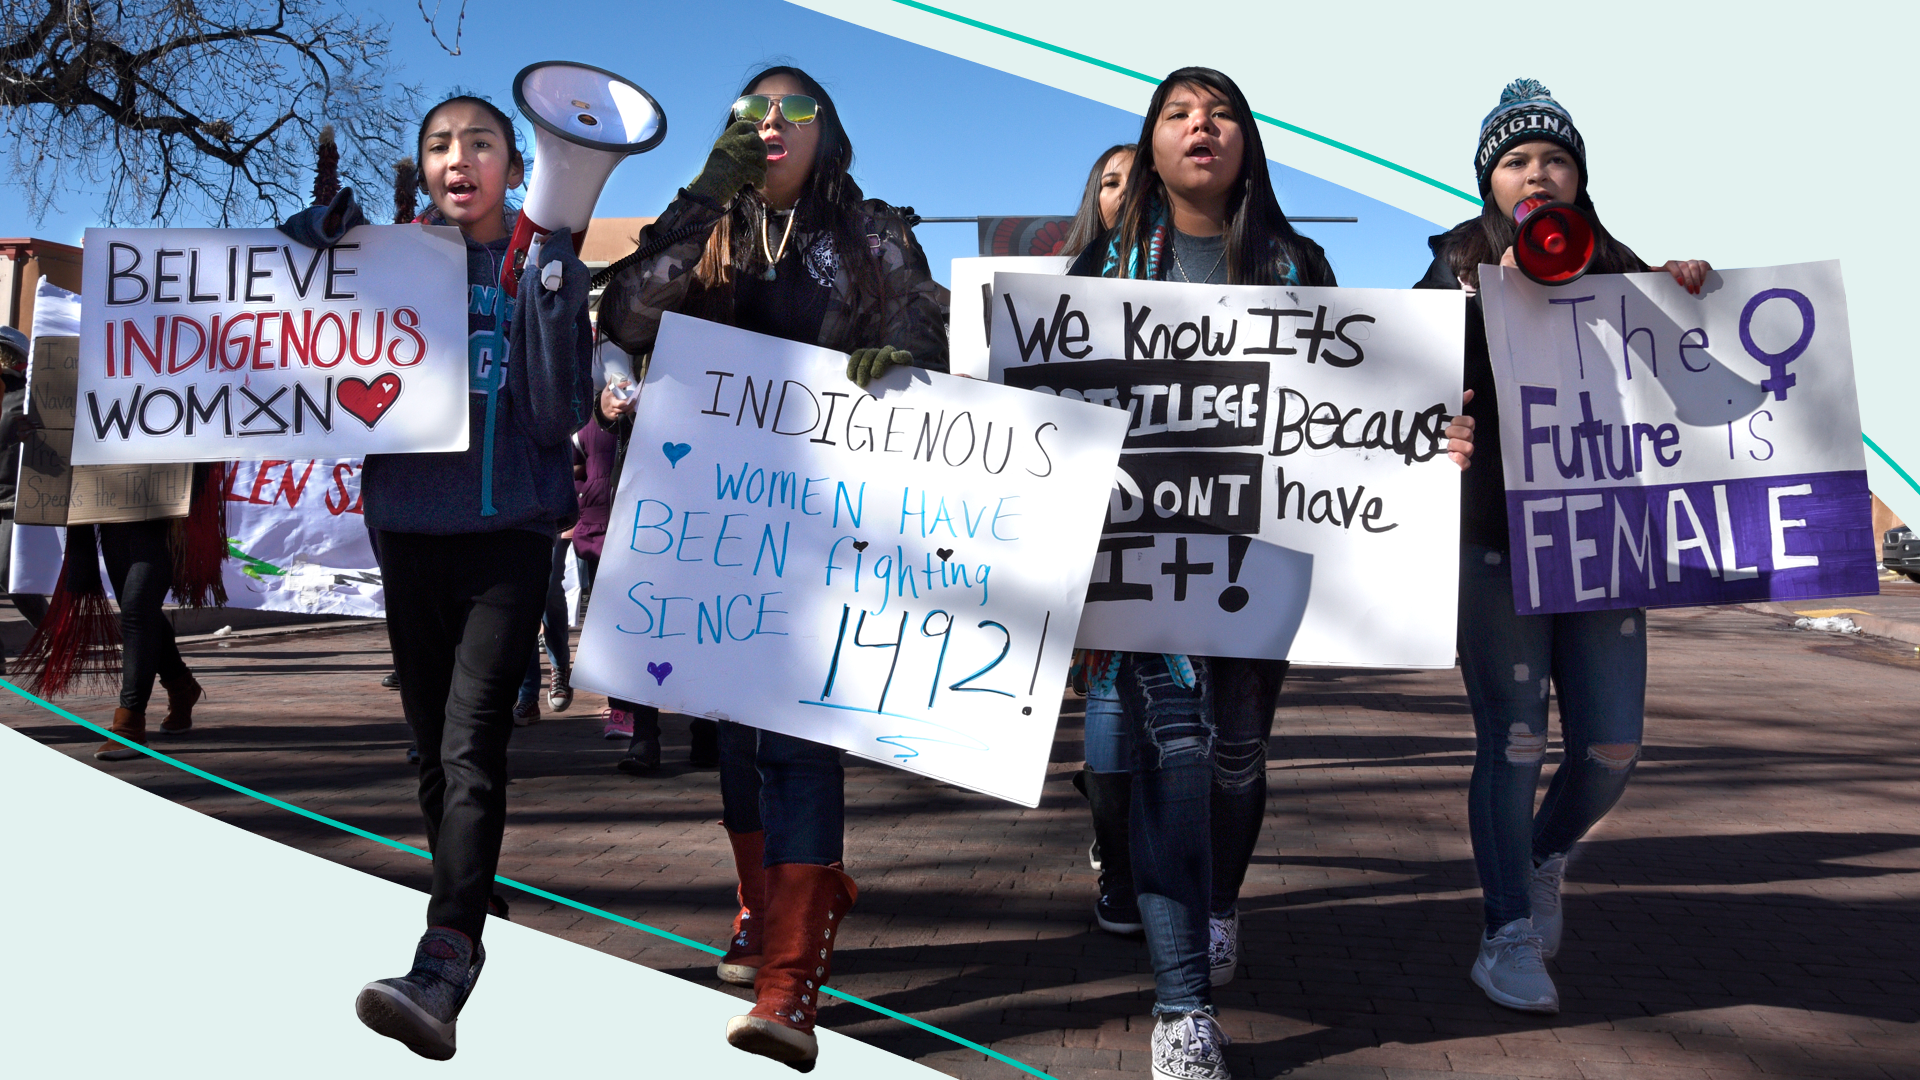 Native American participants in the Women's March walk with signs and bullhorns in Santa Fe, New Mexico.